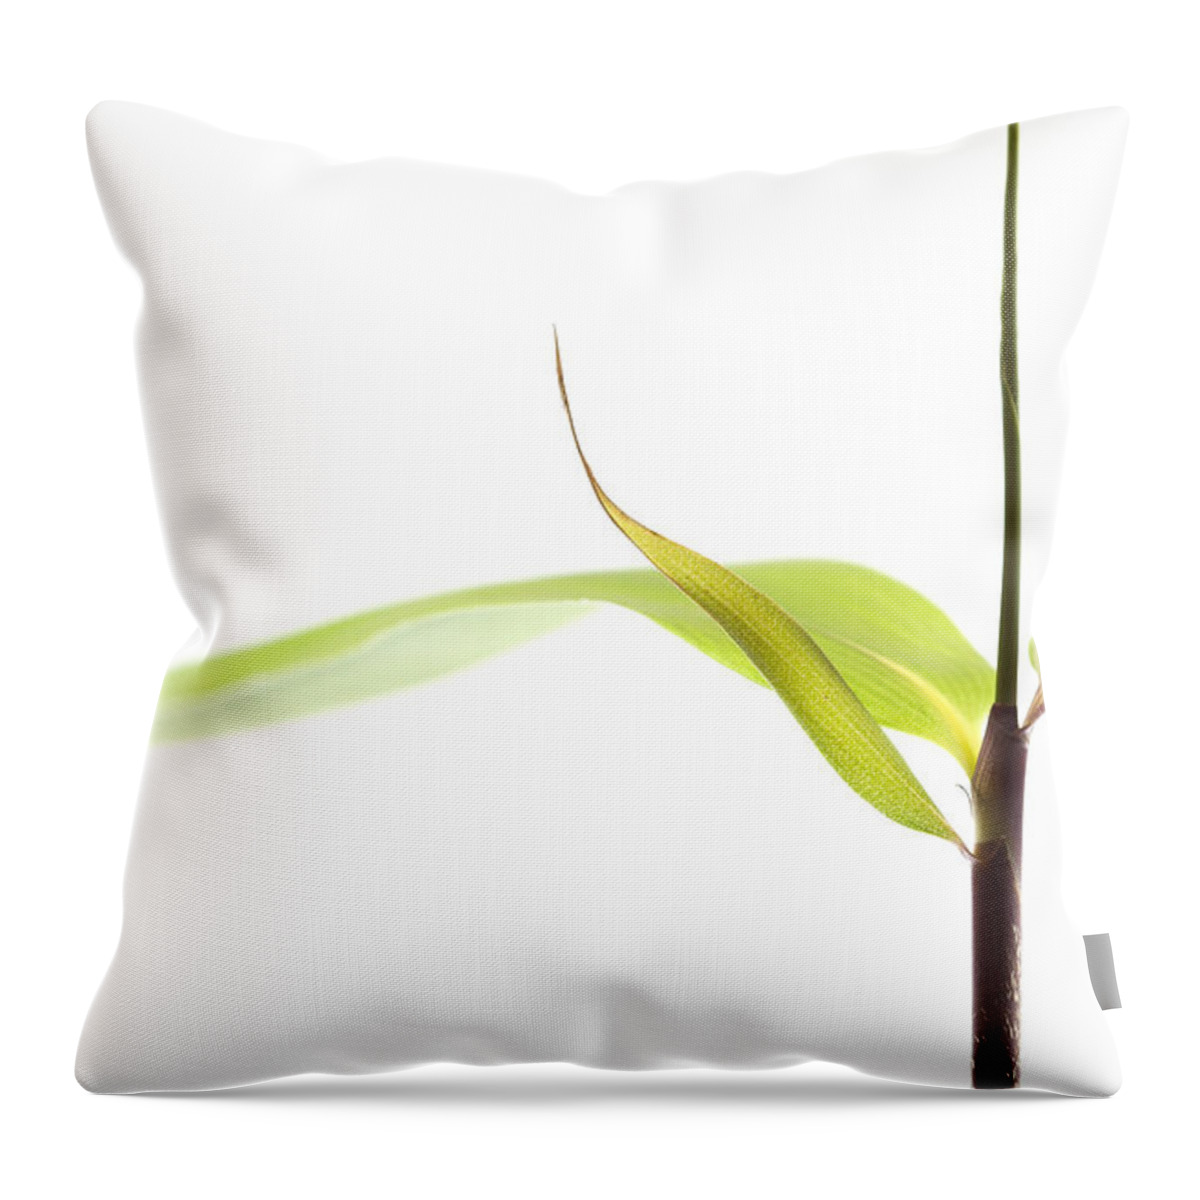 Minimalism Throw Pillow featuring the photograph Bamboo Meditation 1 by Carol Leigh